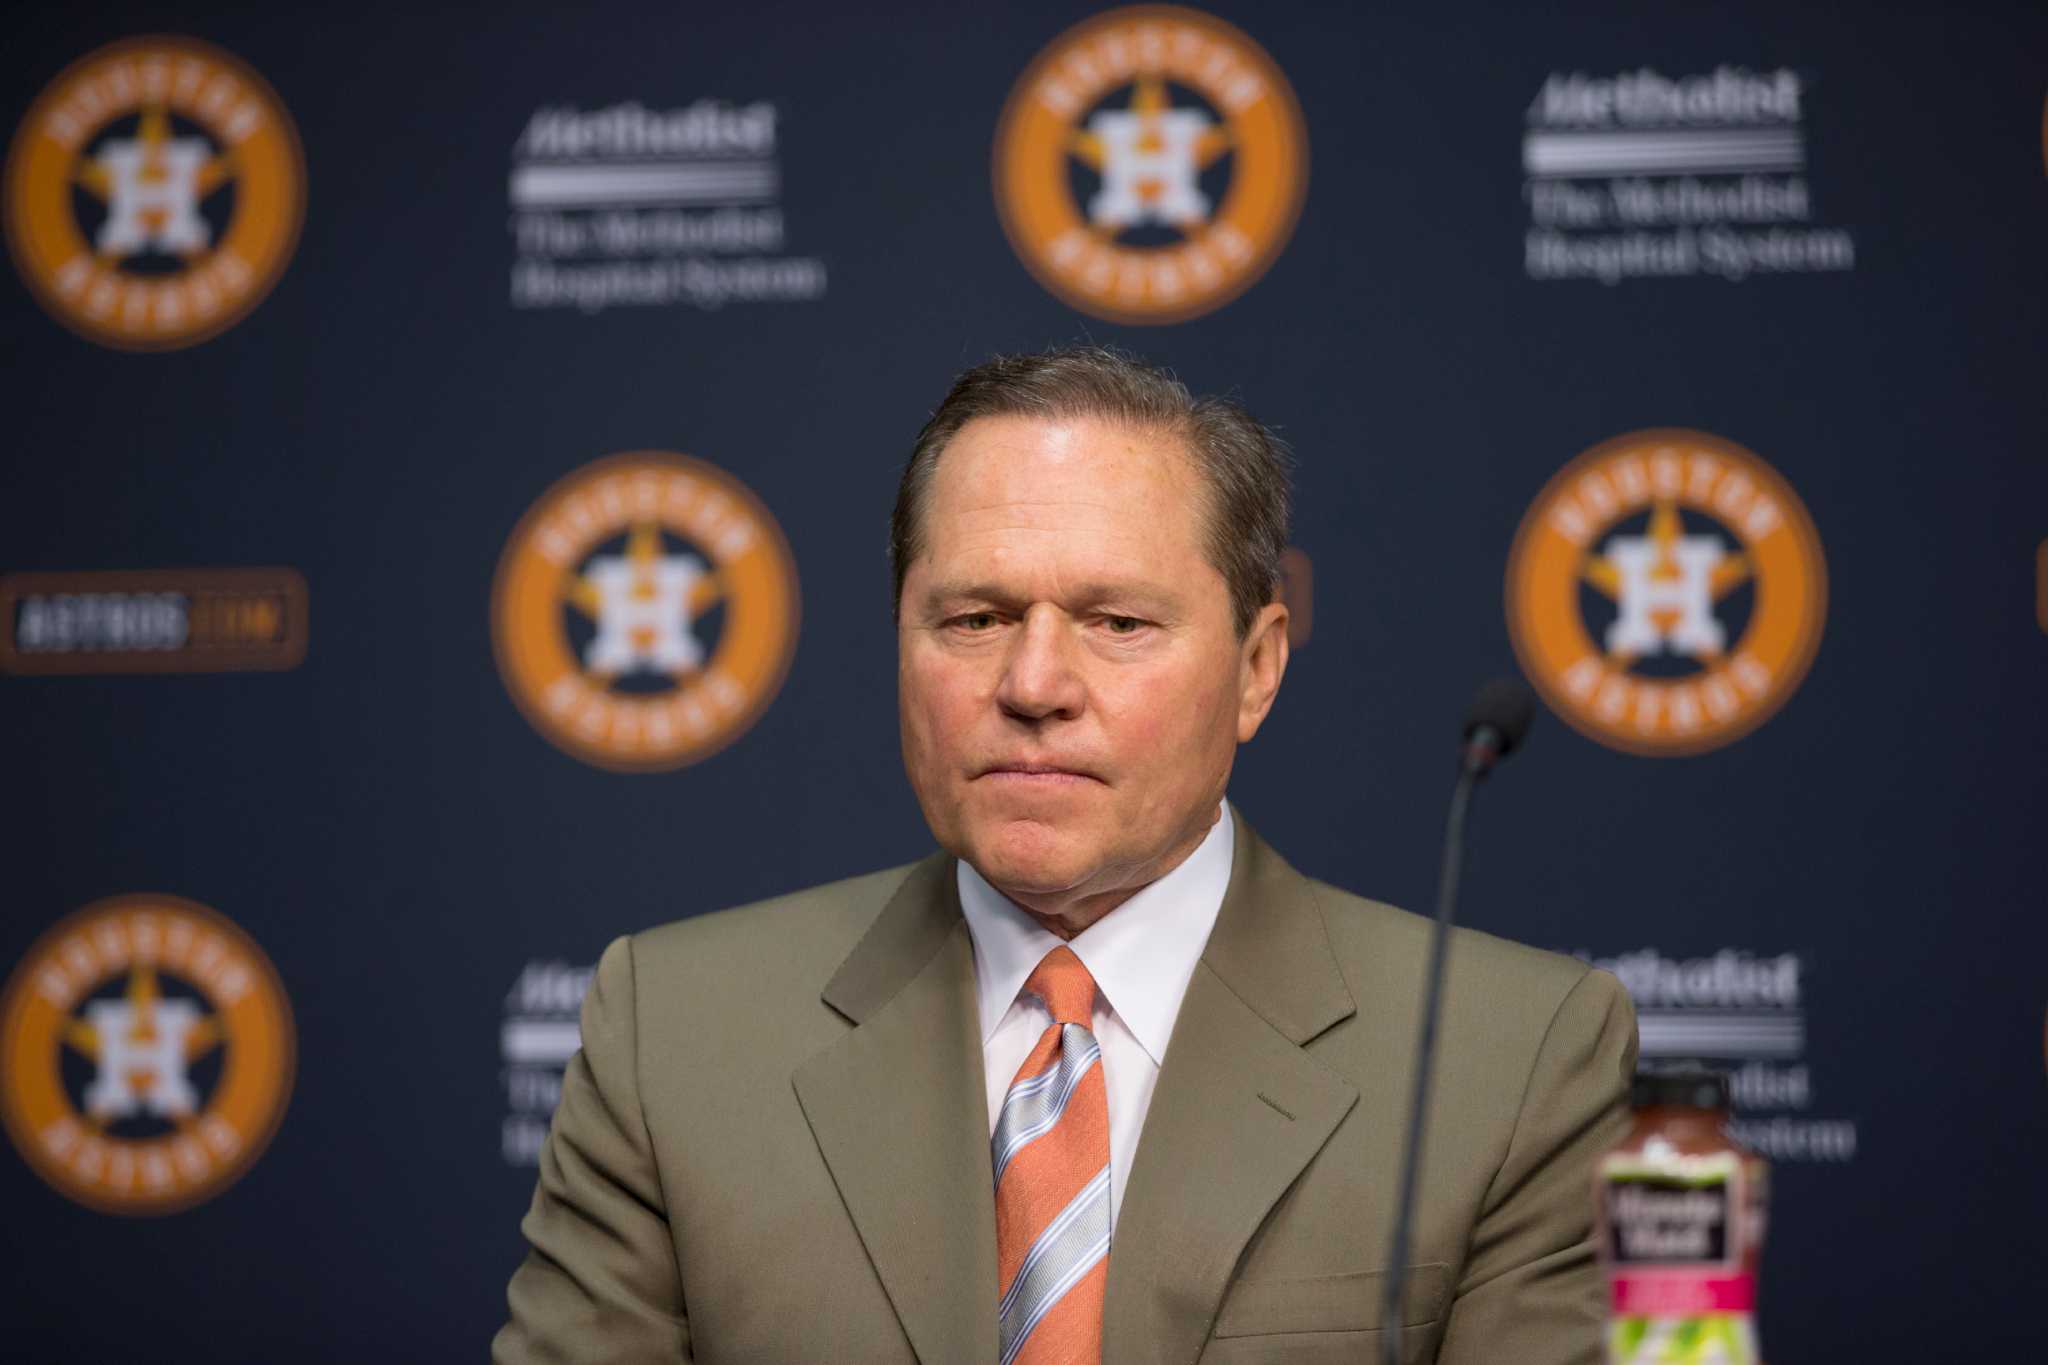 Jose Altuve can't be judged by 60-game season, says agent Scott Boras